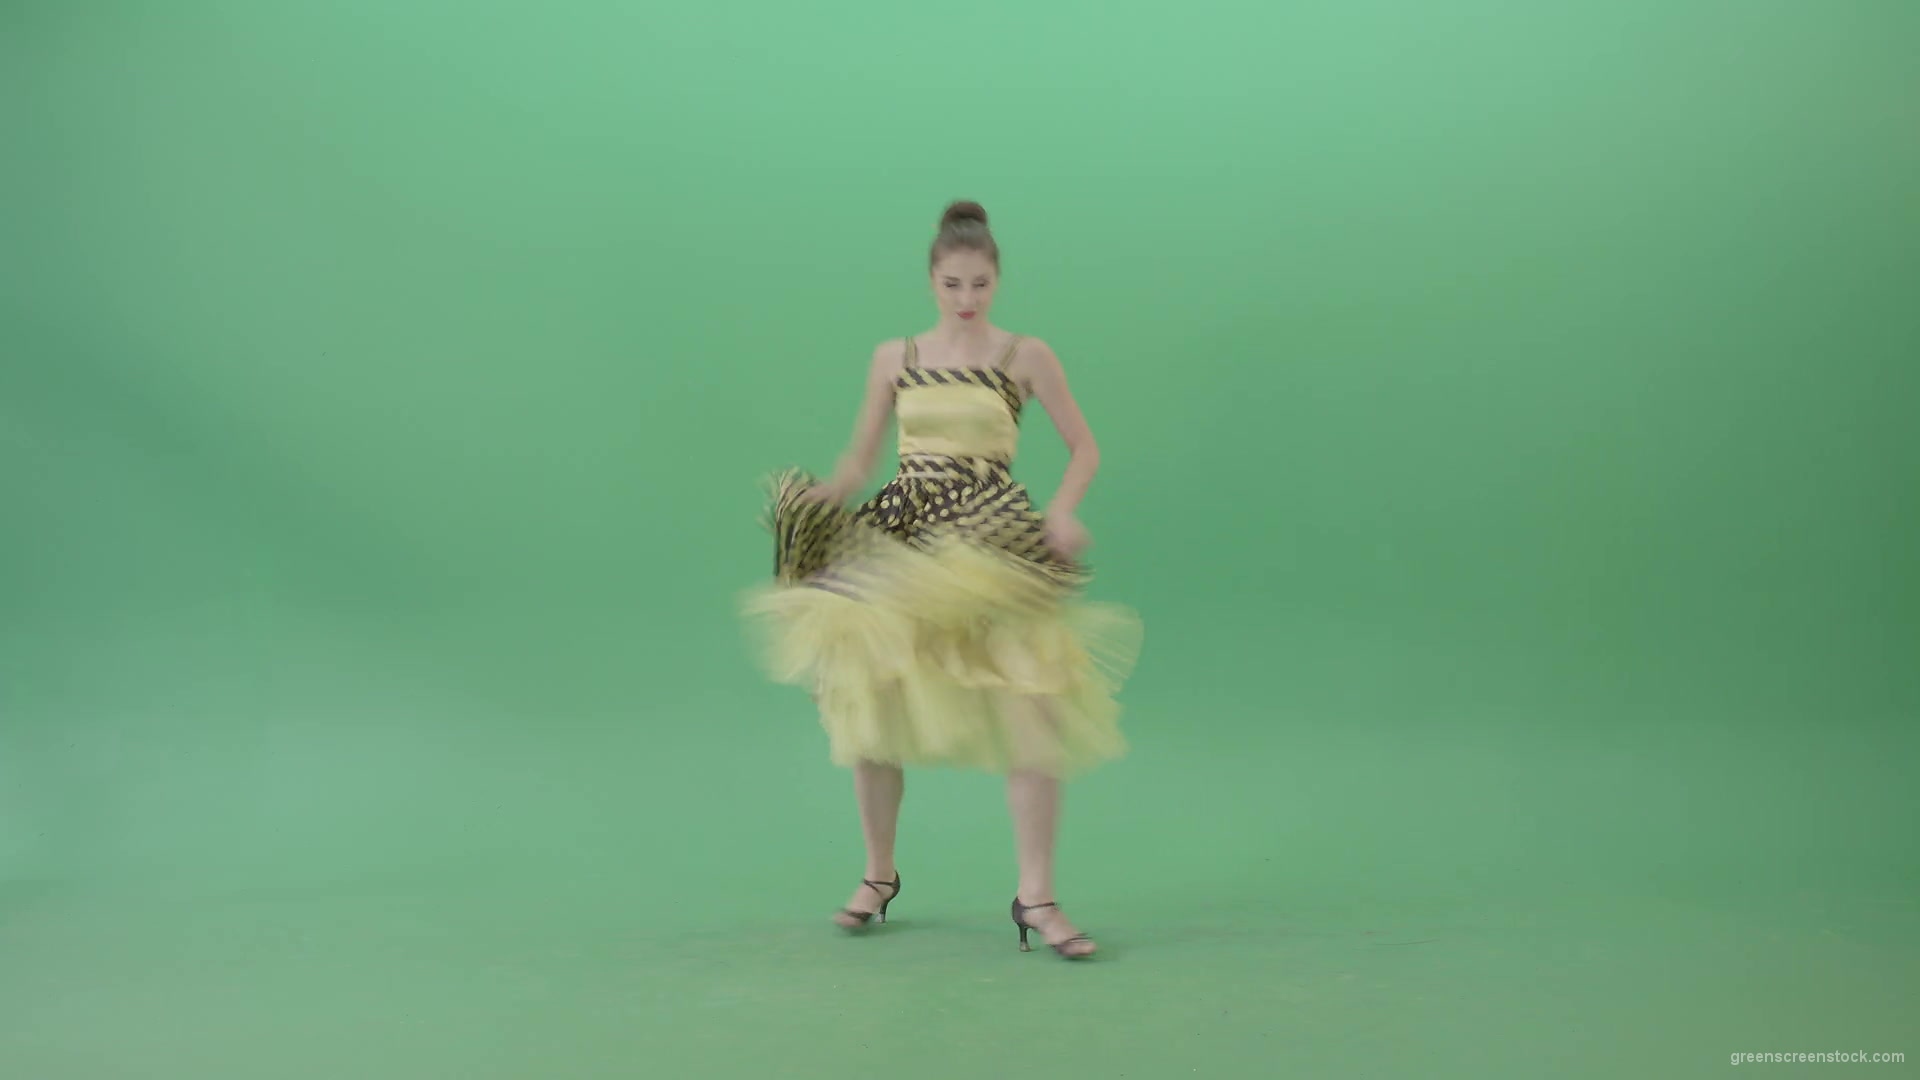 Elegant-Girl-in-Yellow-dress-Dancing-Boogie-woogie-and-chill-on-Green-Screen-4K-Video-Footage-1920_006 Green Screen Stock